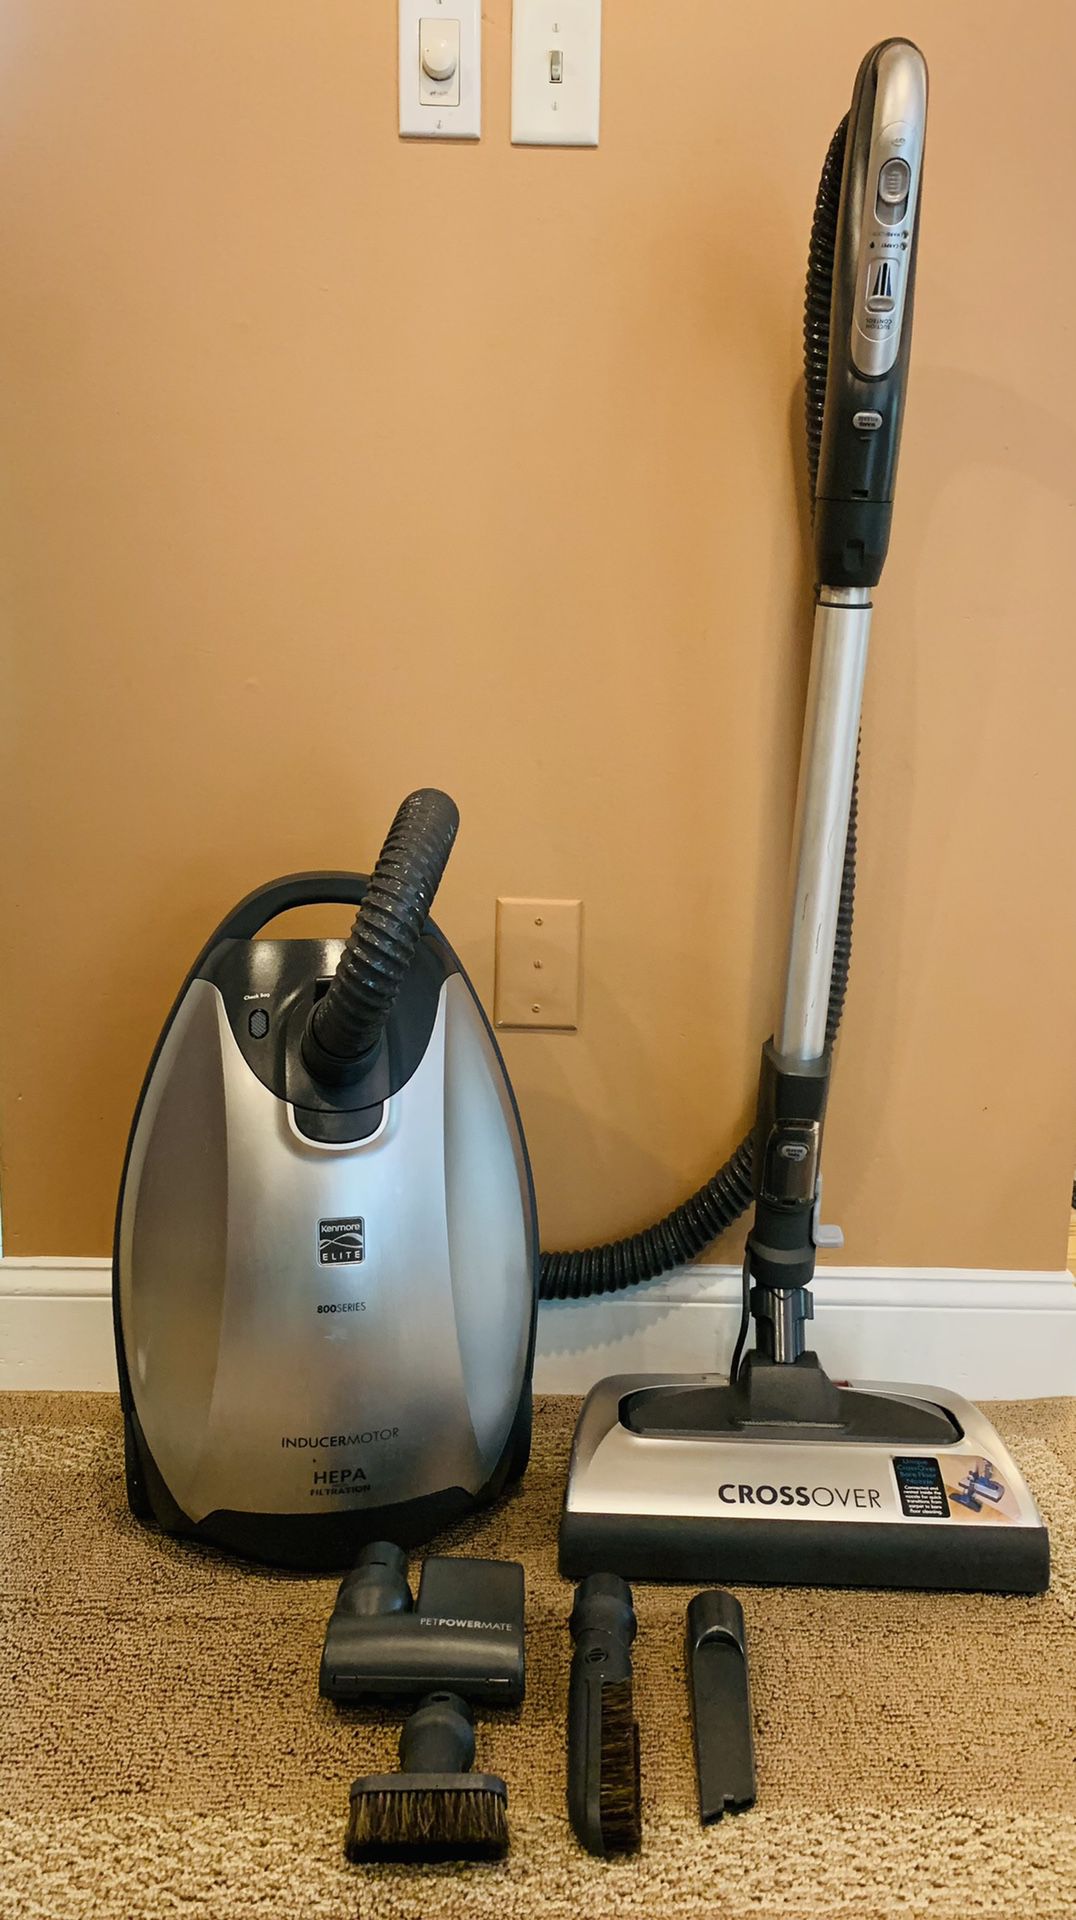 Kenmore crossover 800 series canister vacuum cleaner